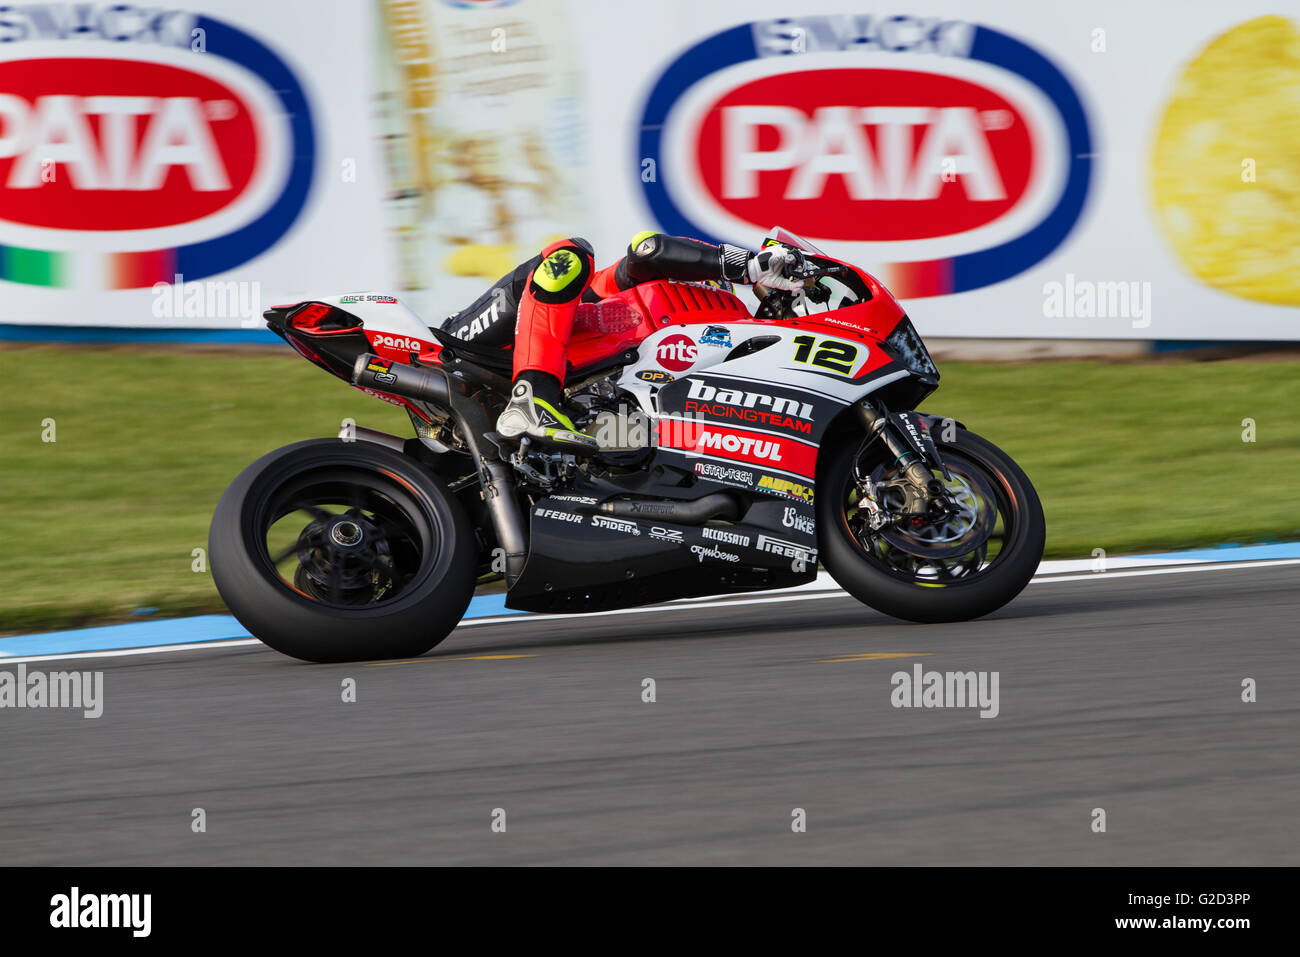 Donington Park, Derby, UK. 28th May, 2016. World Superbikes Acerbis UK Round 7 at Donington Park. #12 Xavi Forés (SPA) - Team Barni racing team, who is second quickest in the Tissot-Superpole 1 Credit:  steven roe/Alamy Live News Stock Photo